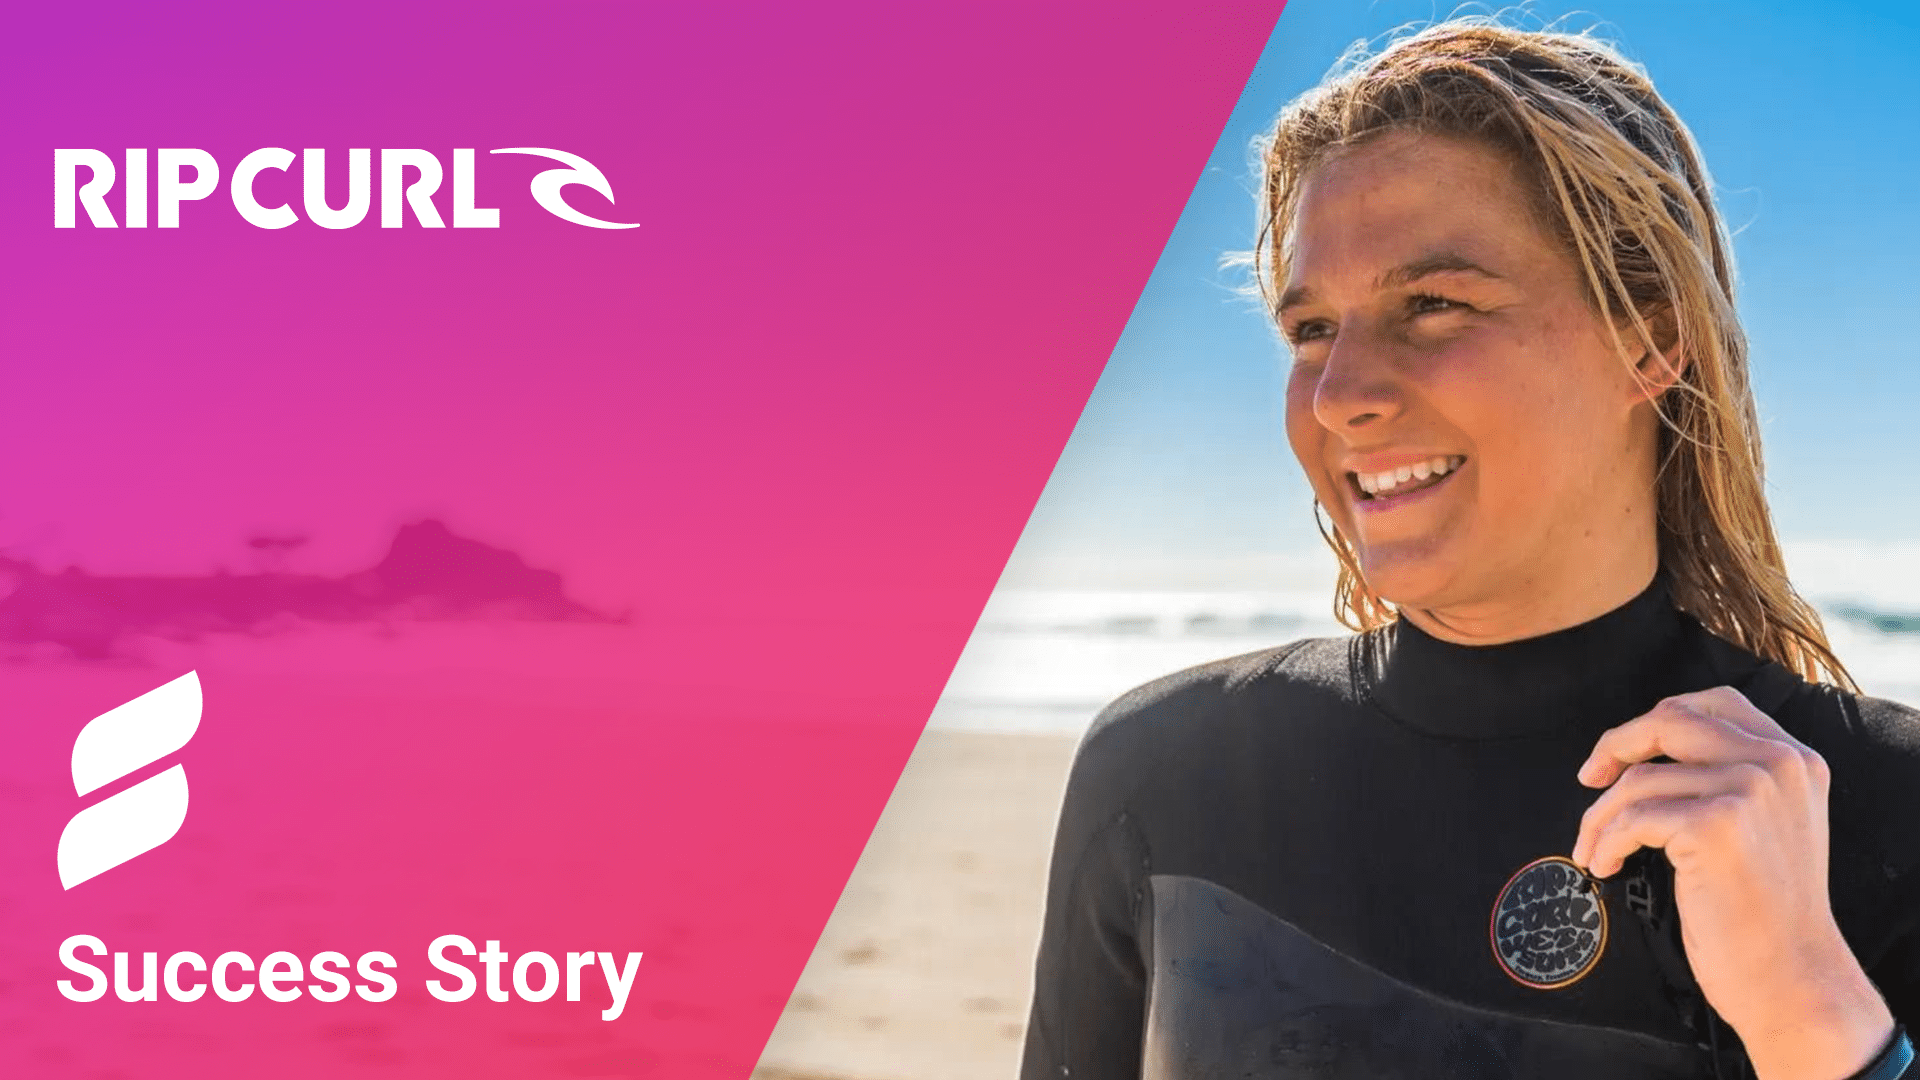 Rip Curl Case Study featured image - blonde, female surfer in black rip curl wet suit smiling on beach; rip curl logo, searchspring logo; the words 